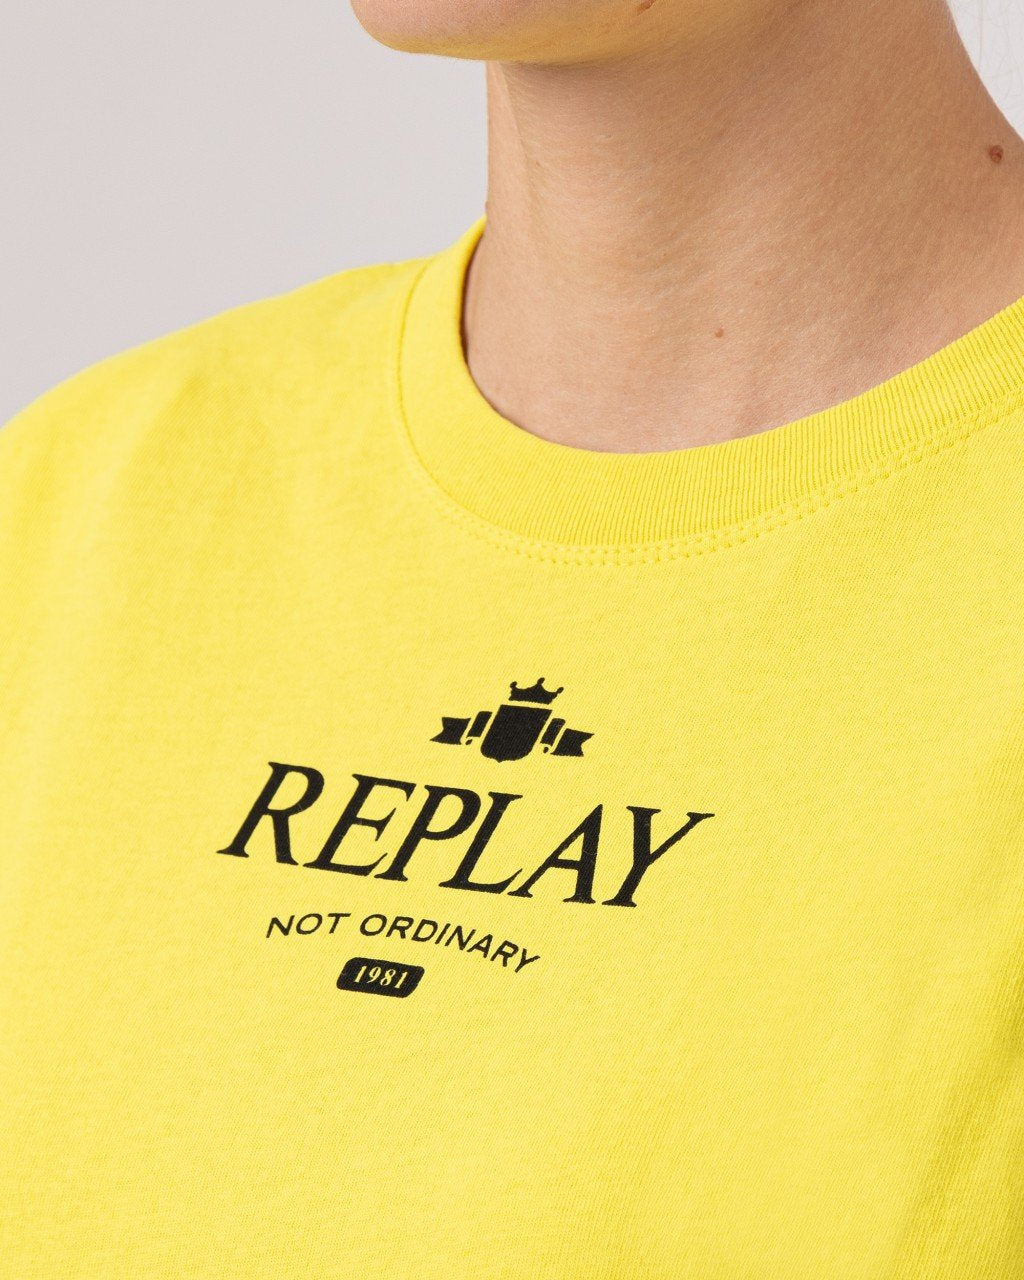 BOXY FIT T-SHIRT WITH REPLAY NOT ORDINARY PRINT